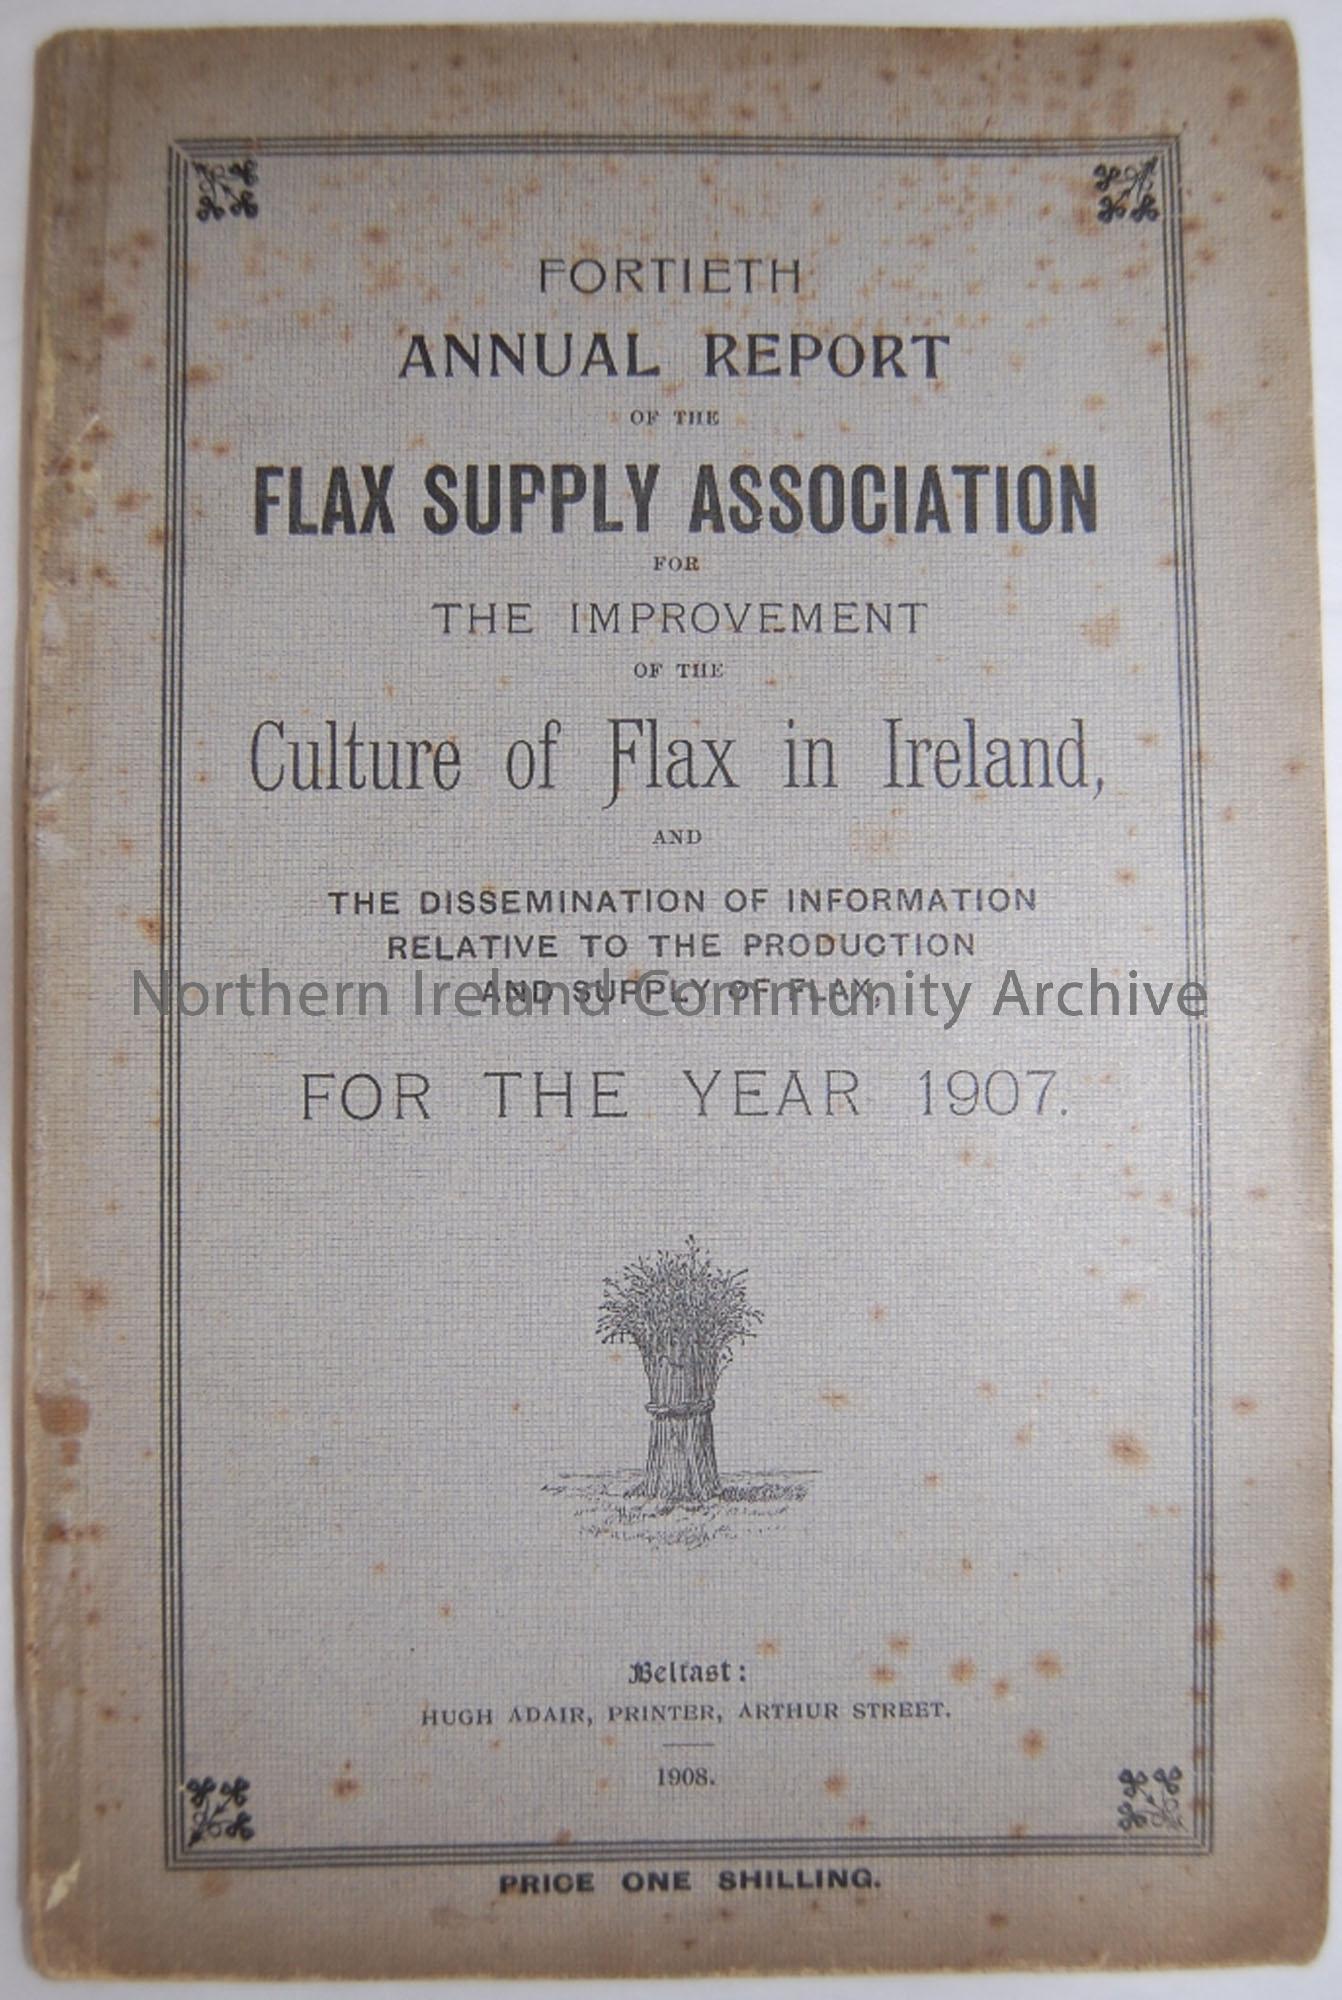 ’40th Annual Report of the Flax Supply Association for the Improvement of the Culture of Flax in Ireland…for the year 1907′ printed in Belfast by Hu…